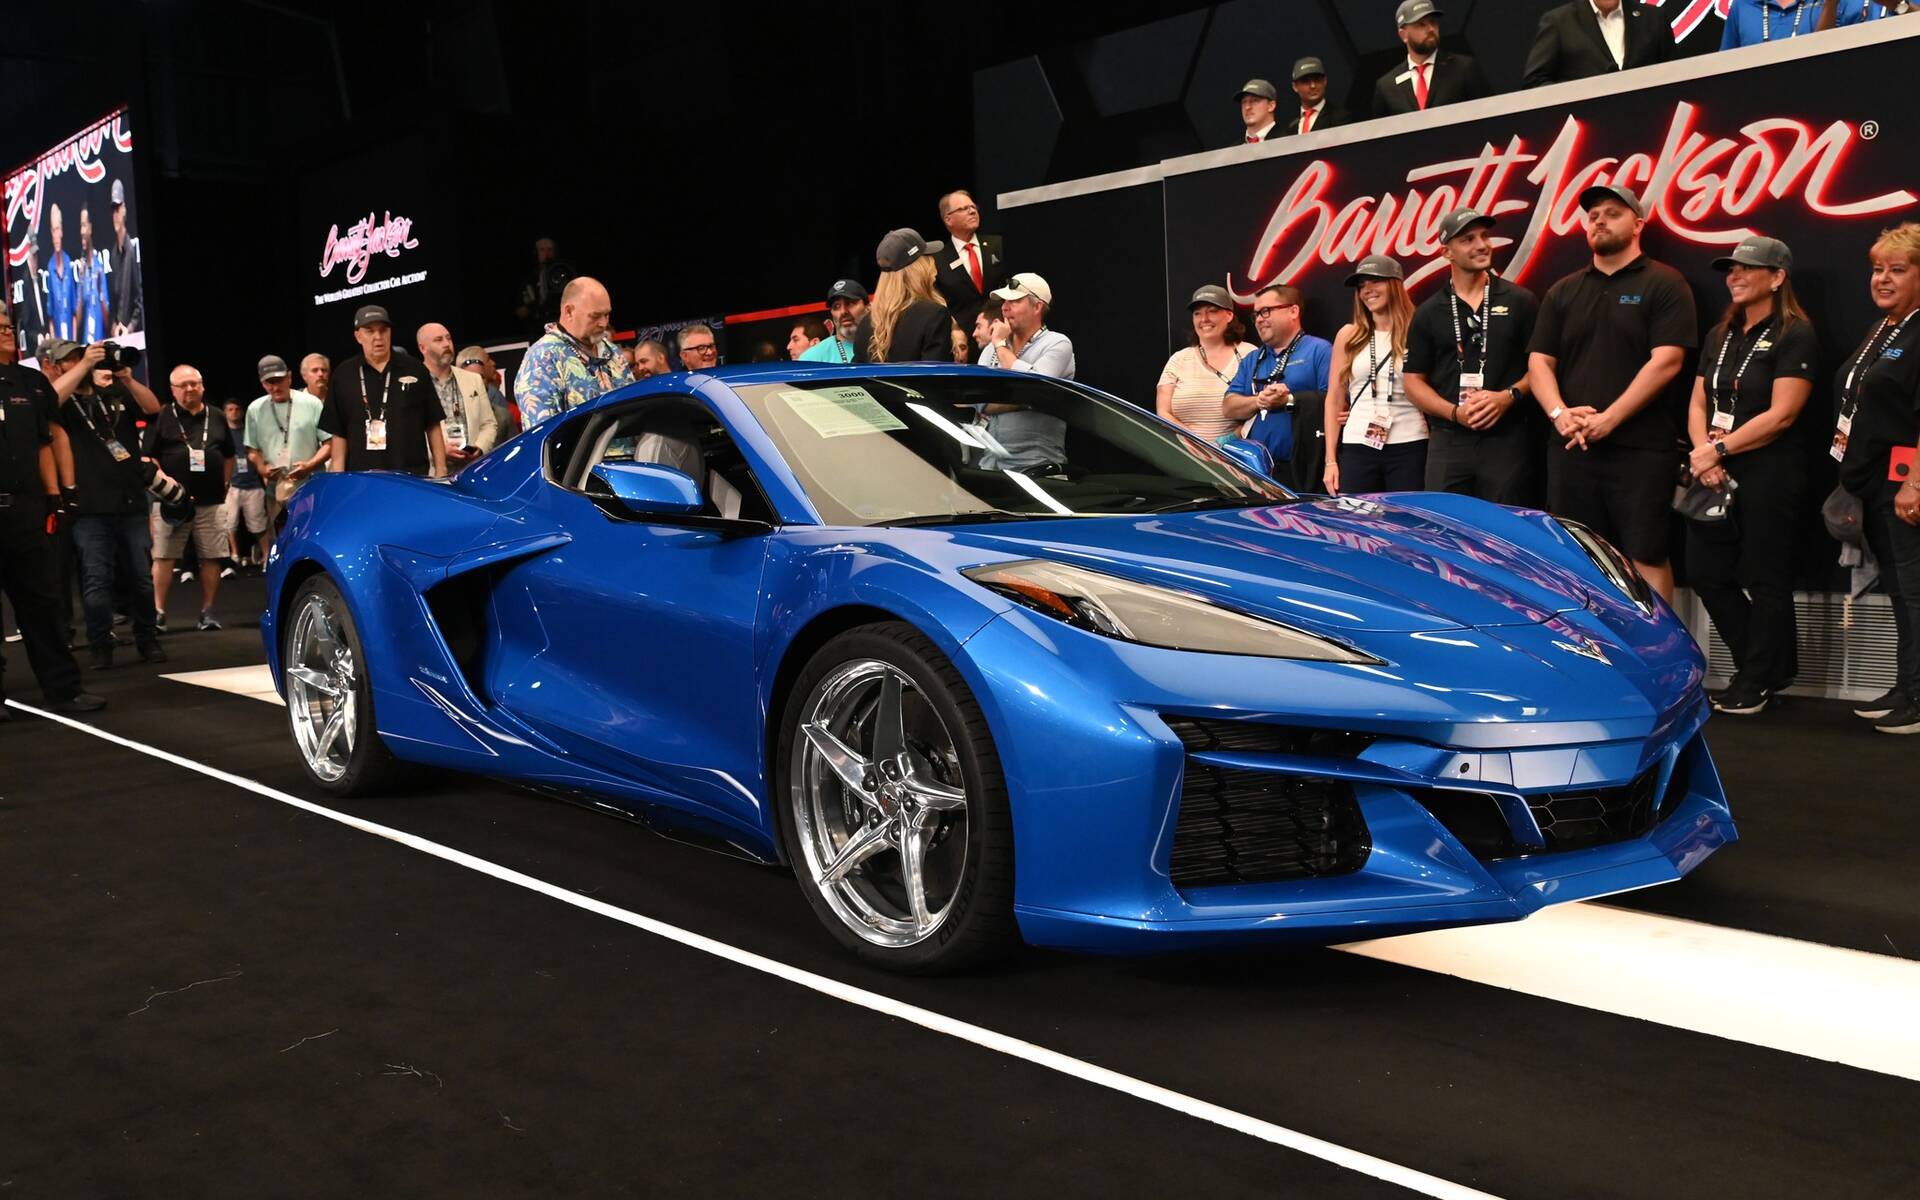 The very first 2024 Chevrolet Corvette E-Ray (VIN 001) sold for $1.1 million USD at the Barrett-Jackson auction in Palm Beach, Florida in April 2023.